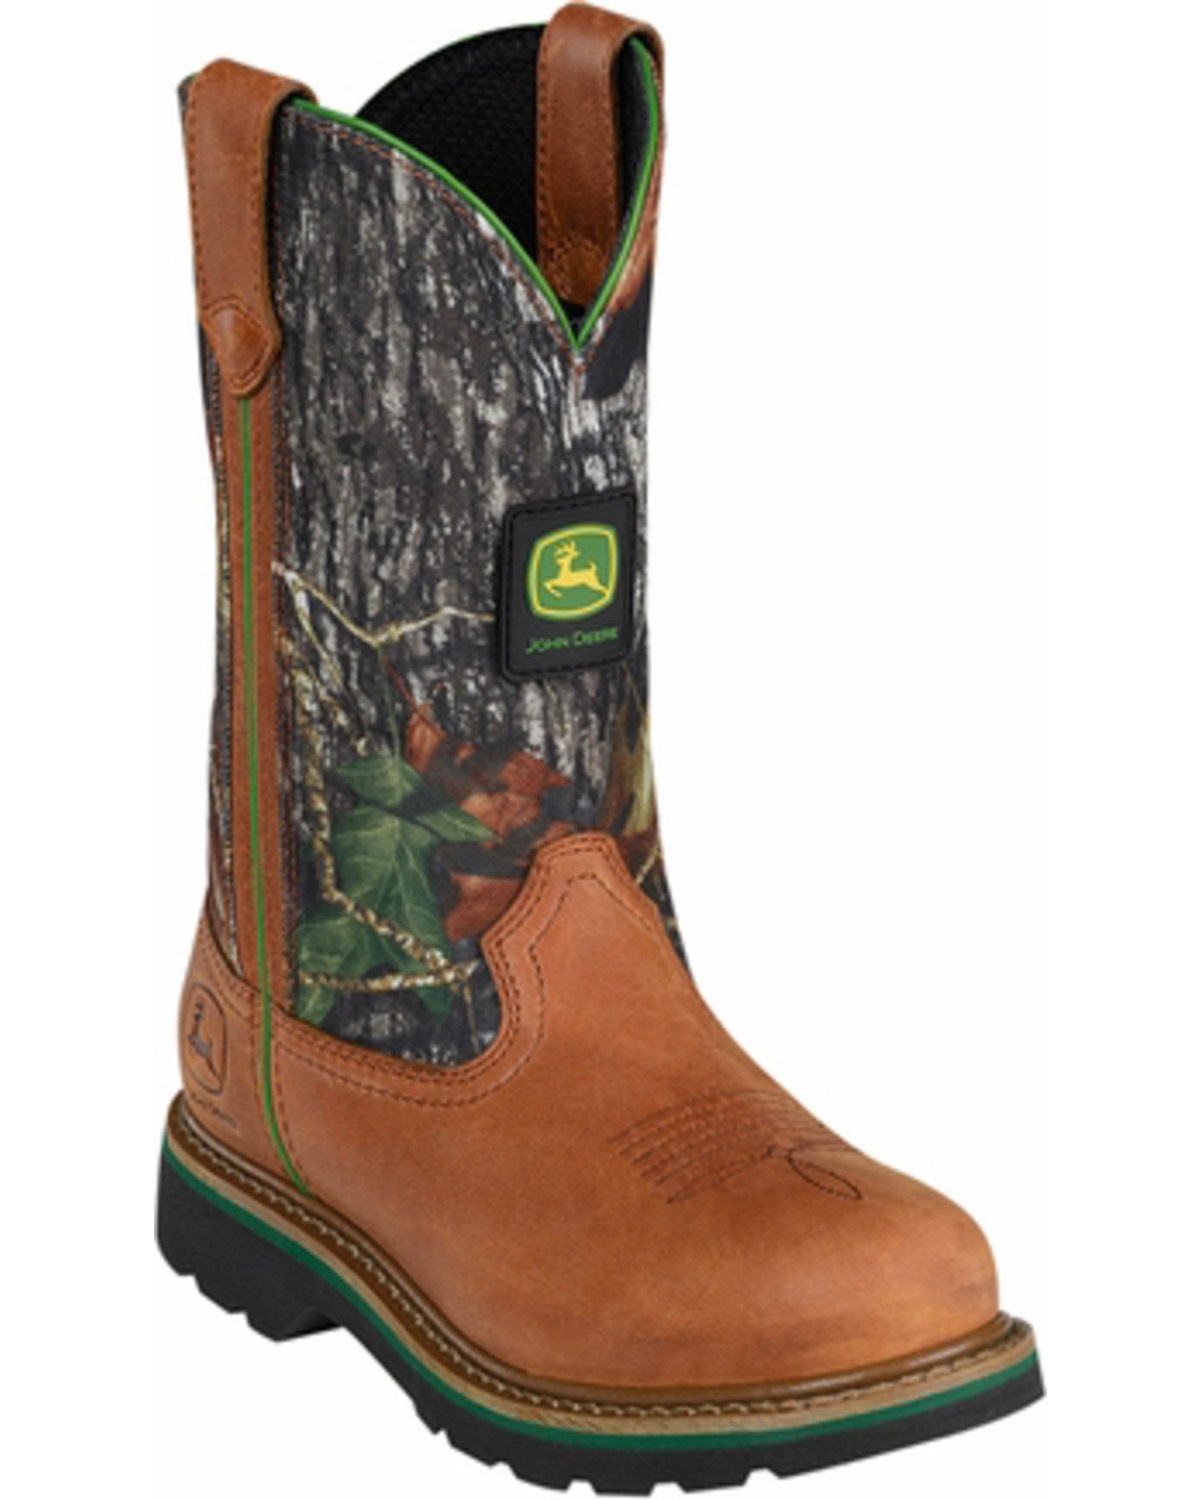 John Deere Camo Leather Cowgirl Boots - Round Toe | Sheplers